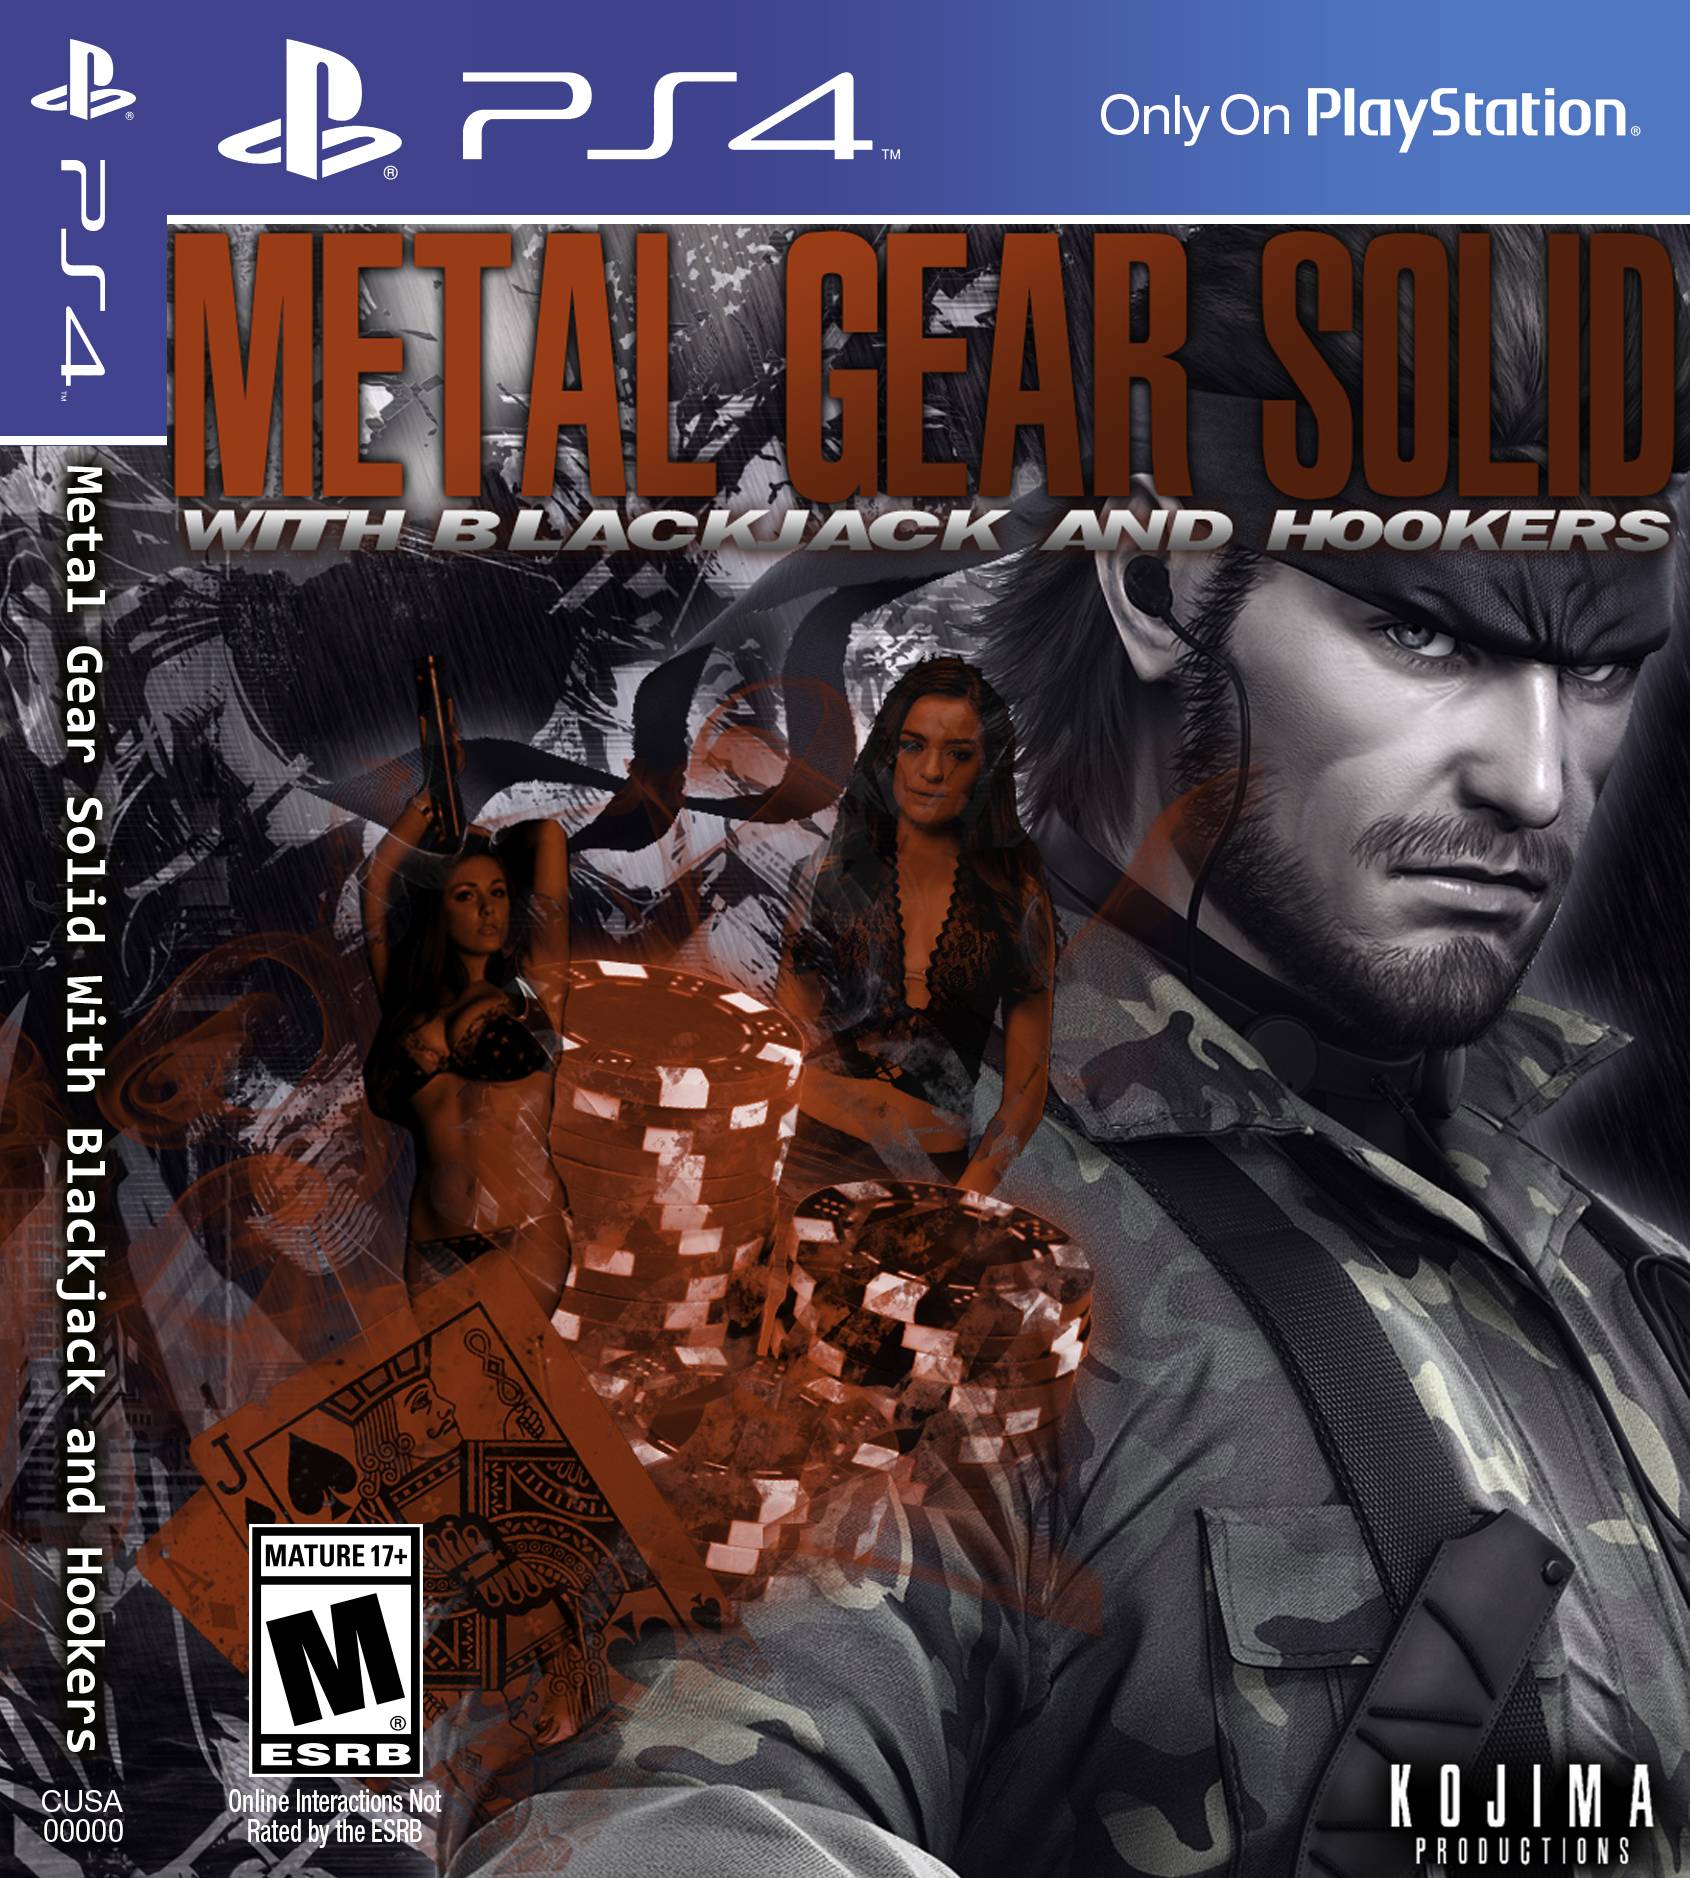 pc game - B. P S 4 Only On PlayStation. Tm PS4 Ookers Metal Gear Solid With Blackjack and Hooken Mature 17 Cusa 00000 Esrb Online Interactions Not Rated by the Esrb Kojima Productions